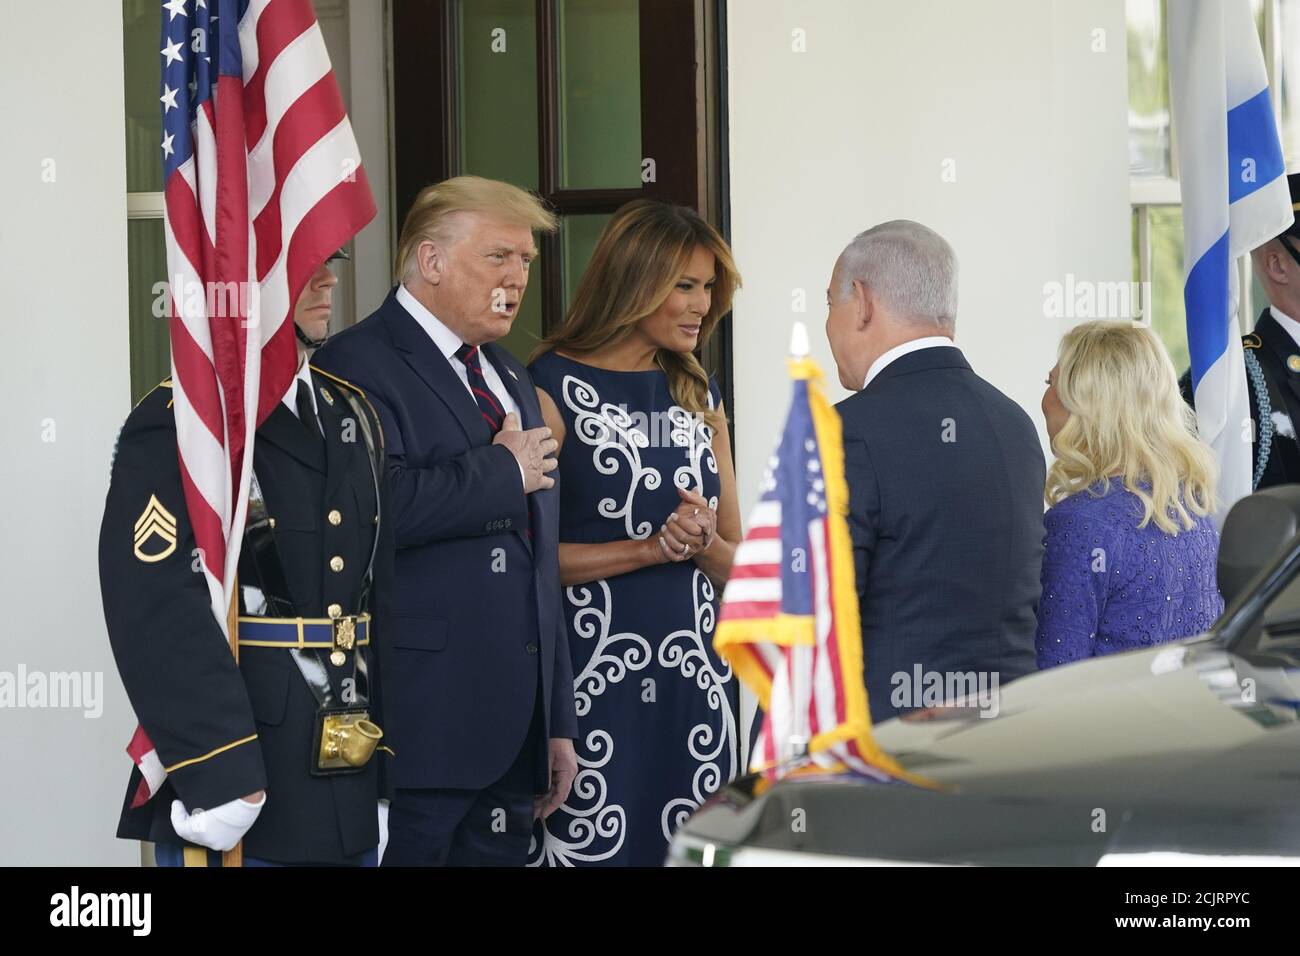 Washington DC, USA. 15th Sep, 2020. President Donald J. Trump and first lady Melania Trump welcome Prime Minister Benjamin Netanyahu of Israel, and his wife Sara, to the White House in Washington, DC on Tuesday, September 15, 2020. Netanyahu is in Washington to sign the Abraham Accords, a peace treaty between Israel and the United Arab Emirates, and a declaration of intent to make peace with Bahrain. Credit: UPI/Alamy Live News Stock Photo